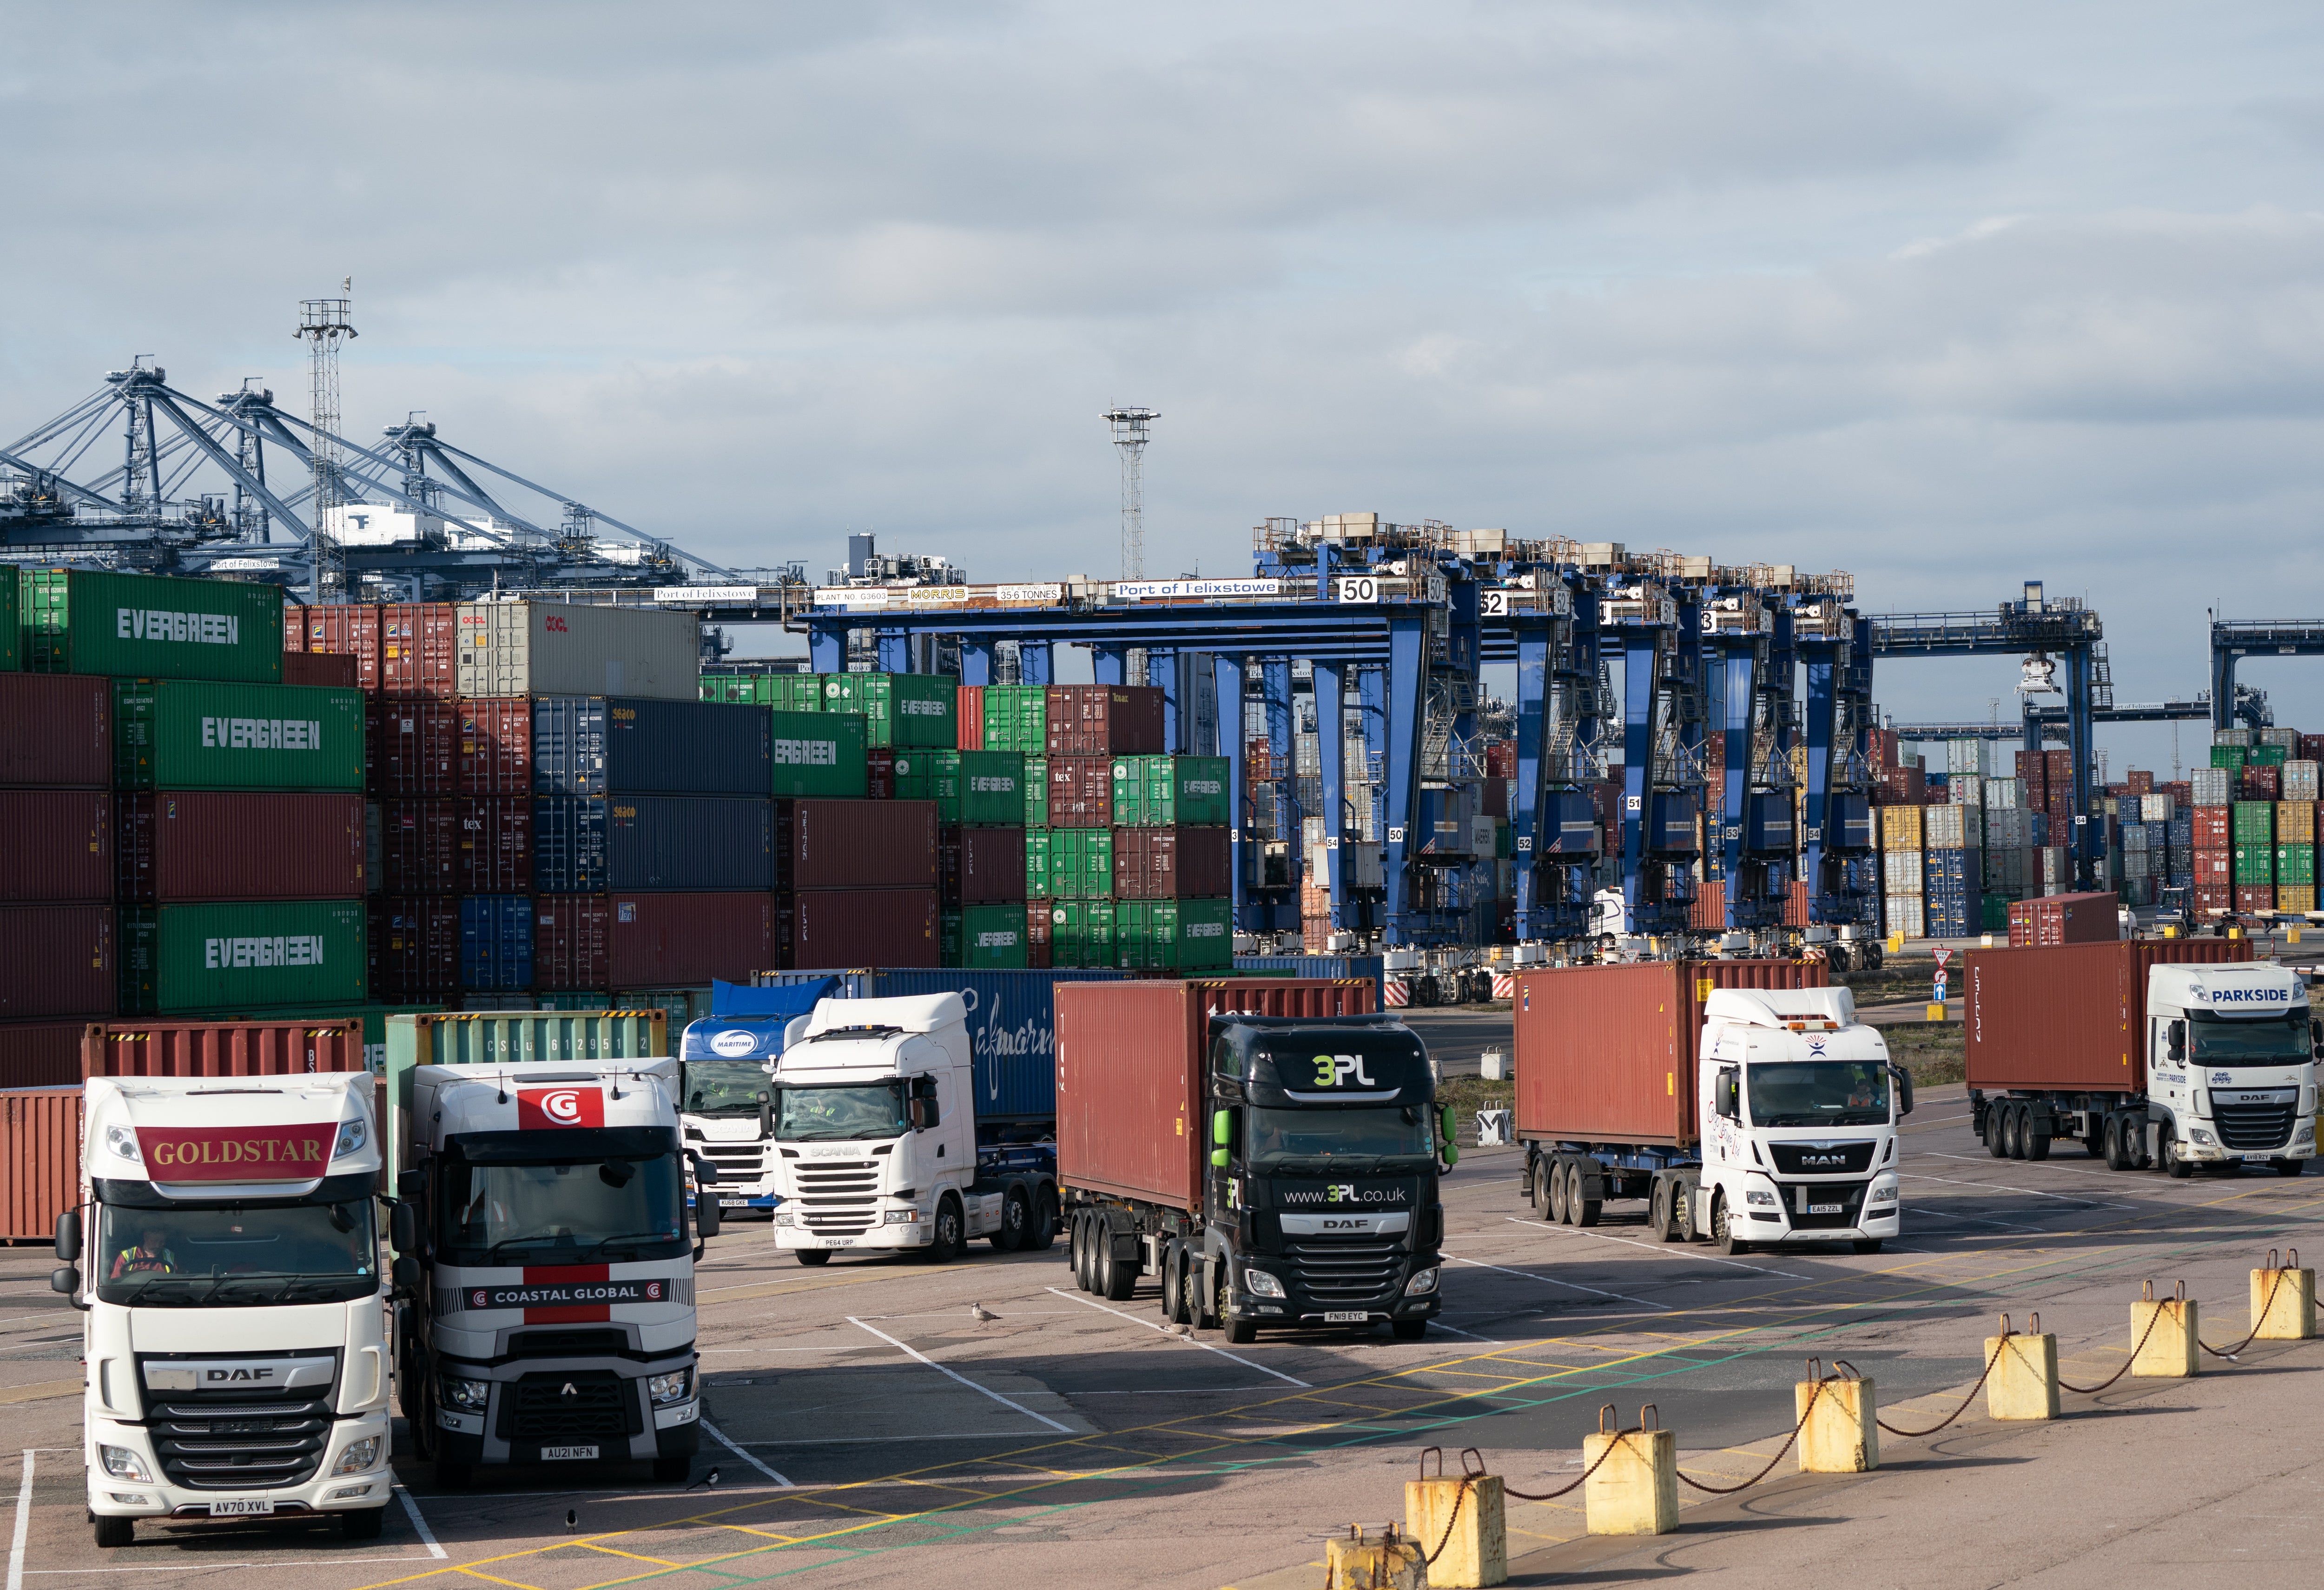 Lorries wait at the Port of Felixstowe in Suffolk. Industry bosses have warned that driver shortages are not improving (Joe Giddens/PA)